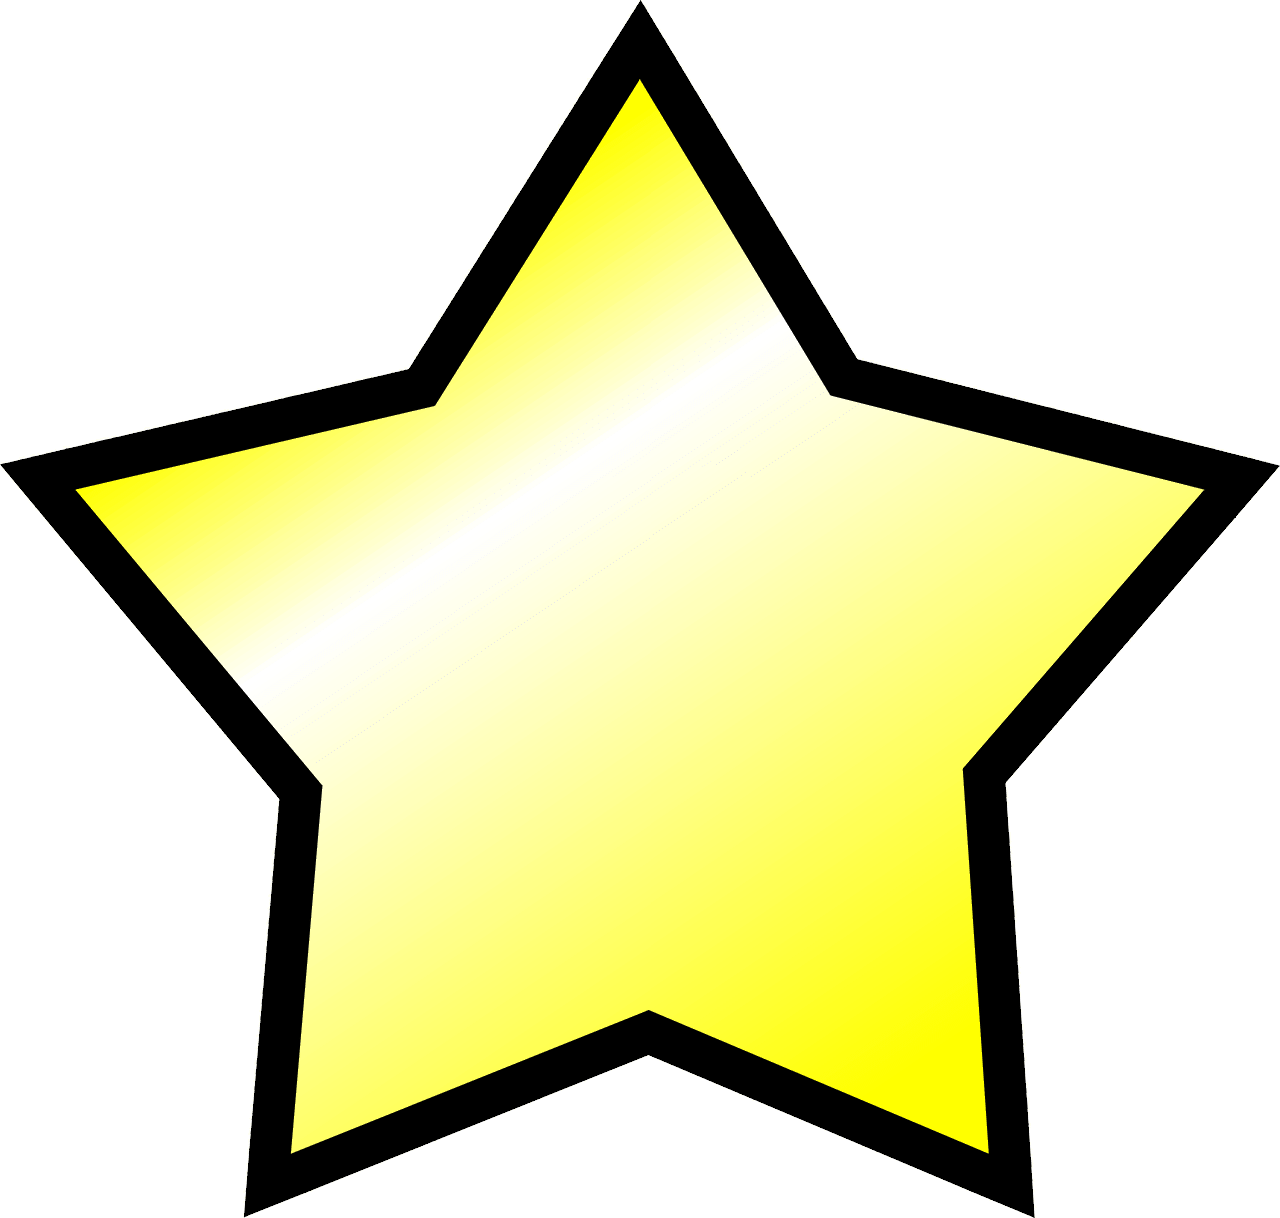 File:Star Ouro.gif - Wikimedia Commons